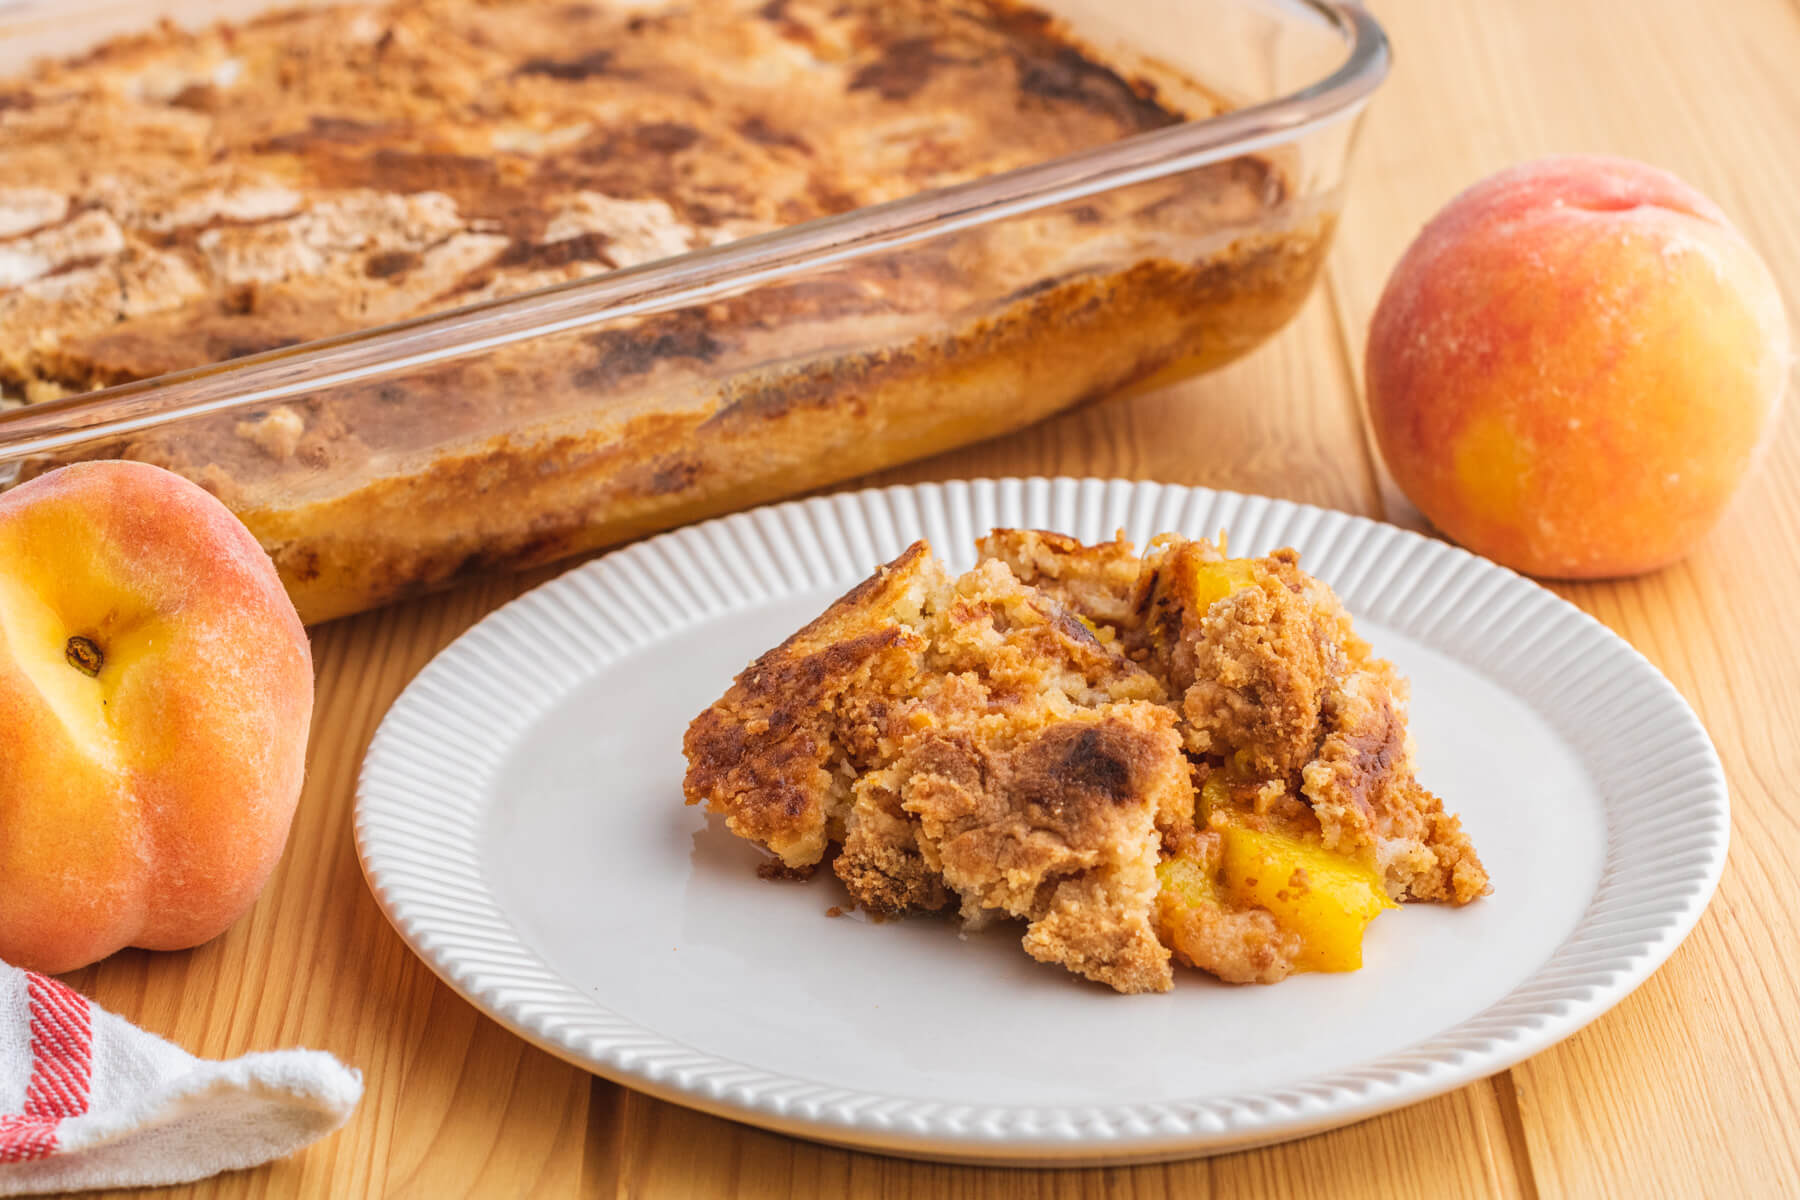 A white plate containing a scoop of peach cobbler dump cake.